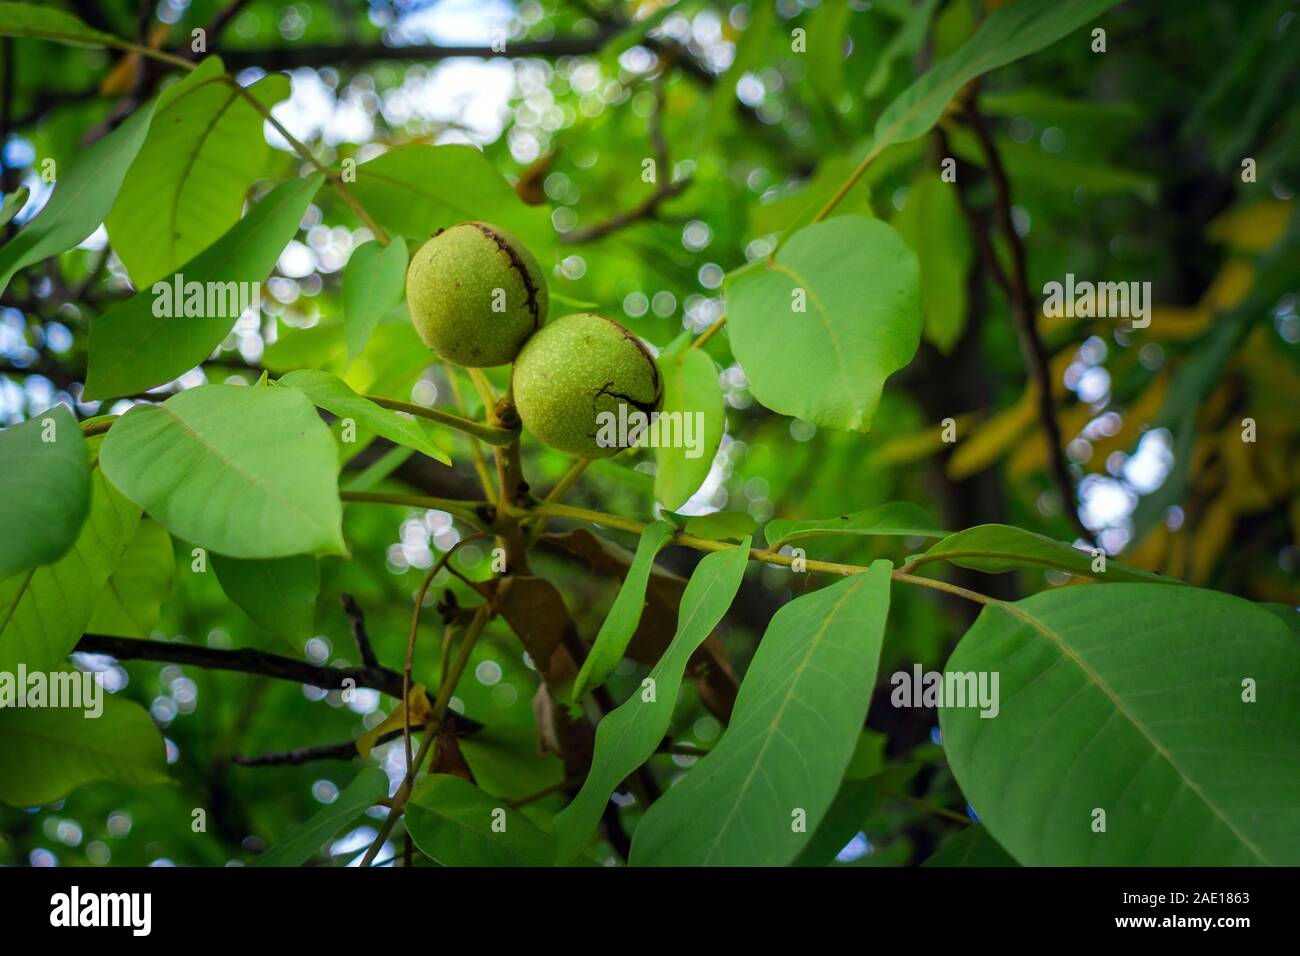 walnut on a tree. the cultivation of nuts. Green leaves and an unripe nut. Stock Photo